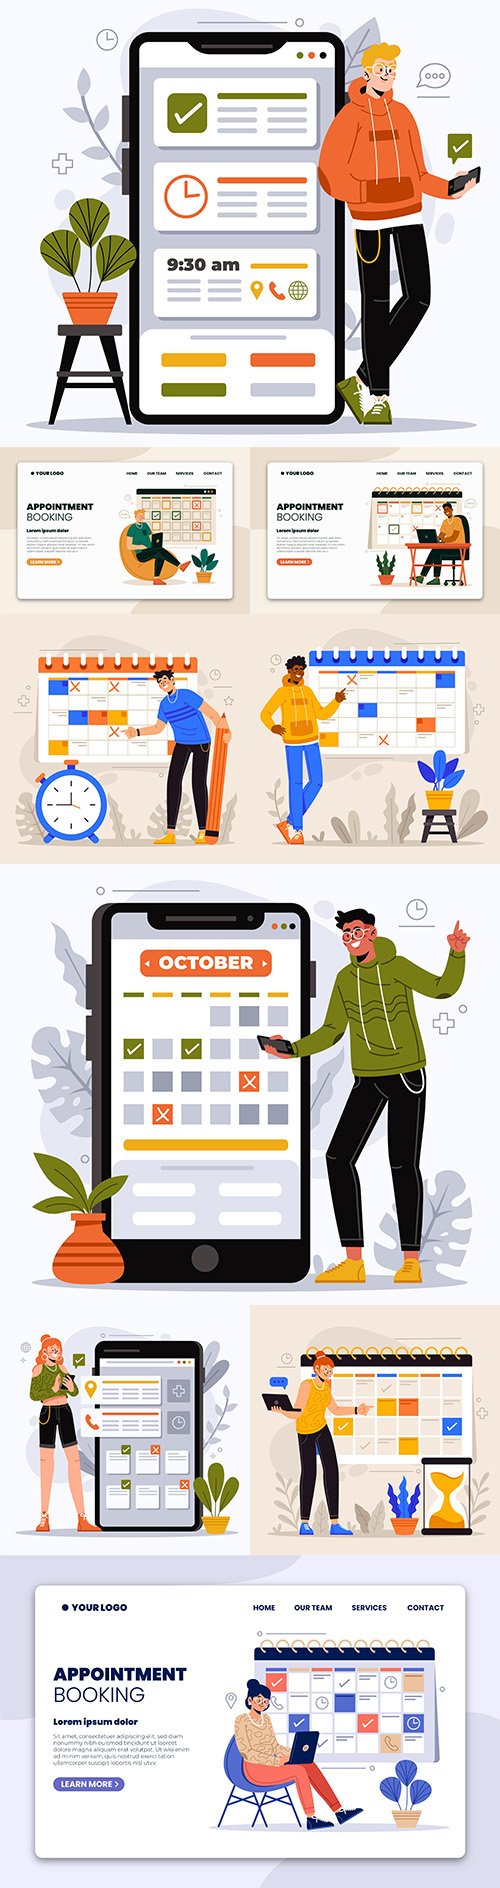 People booking an appointment entry with calendar concept